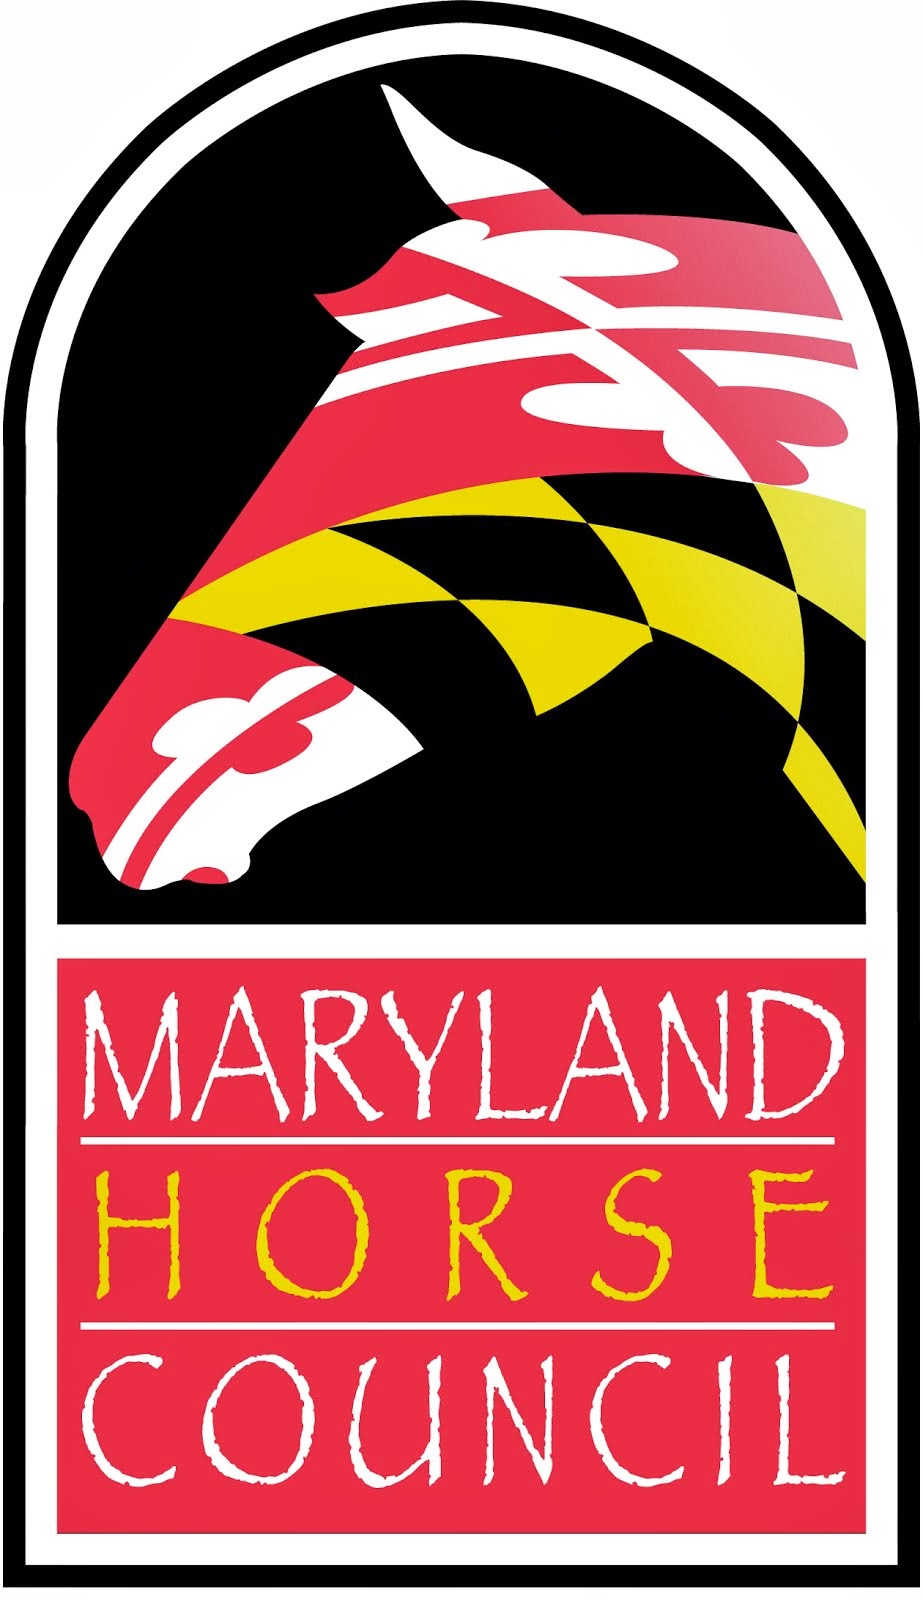 The Maryland Horse Council